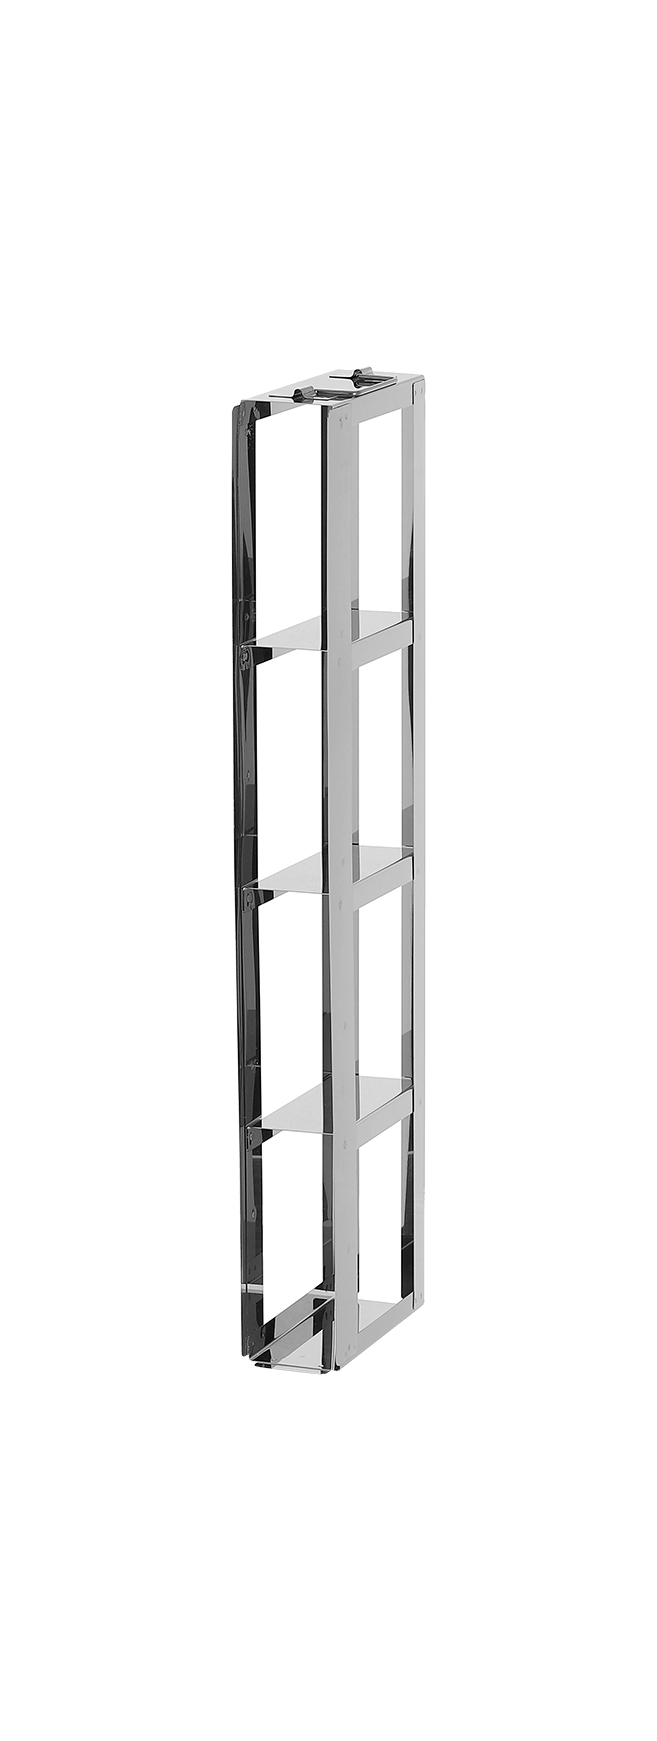 Cole-Parmer Essentials PolarSafe® Security Lock Device for Upright Freezer  Drawer Rack; 5-11/16 x 8-11/16